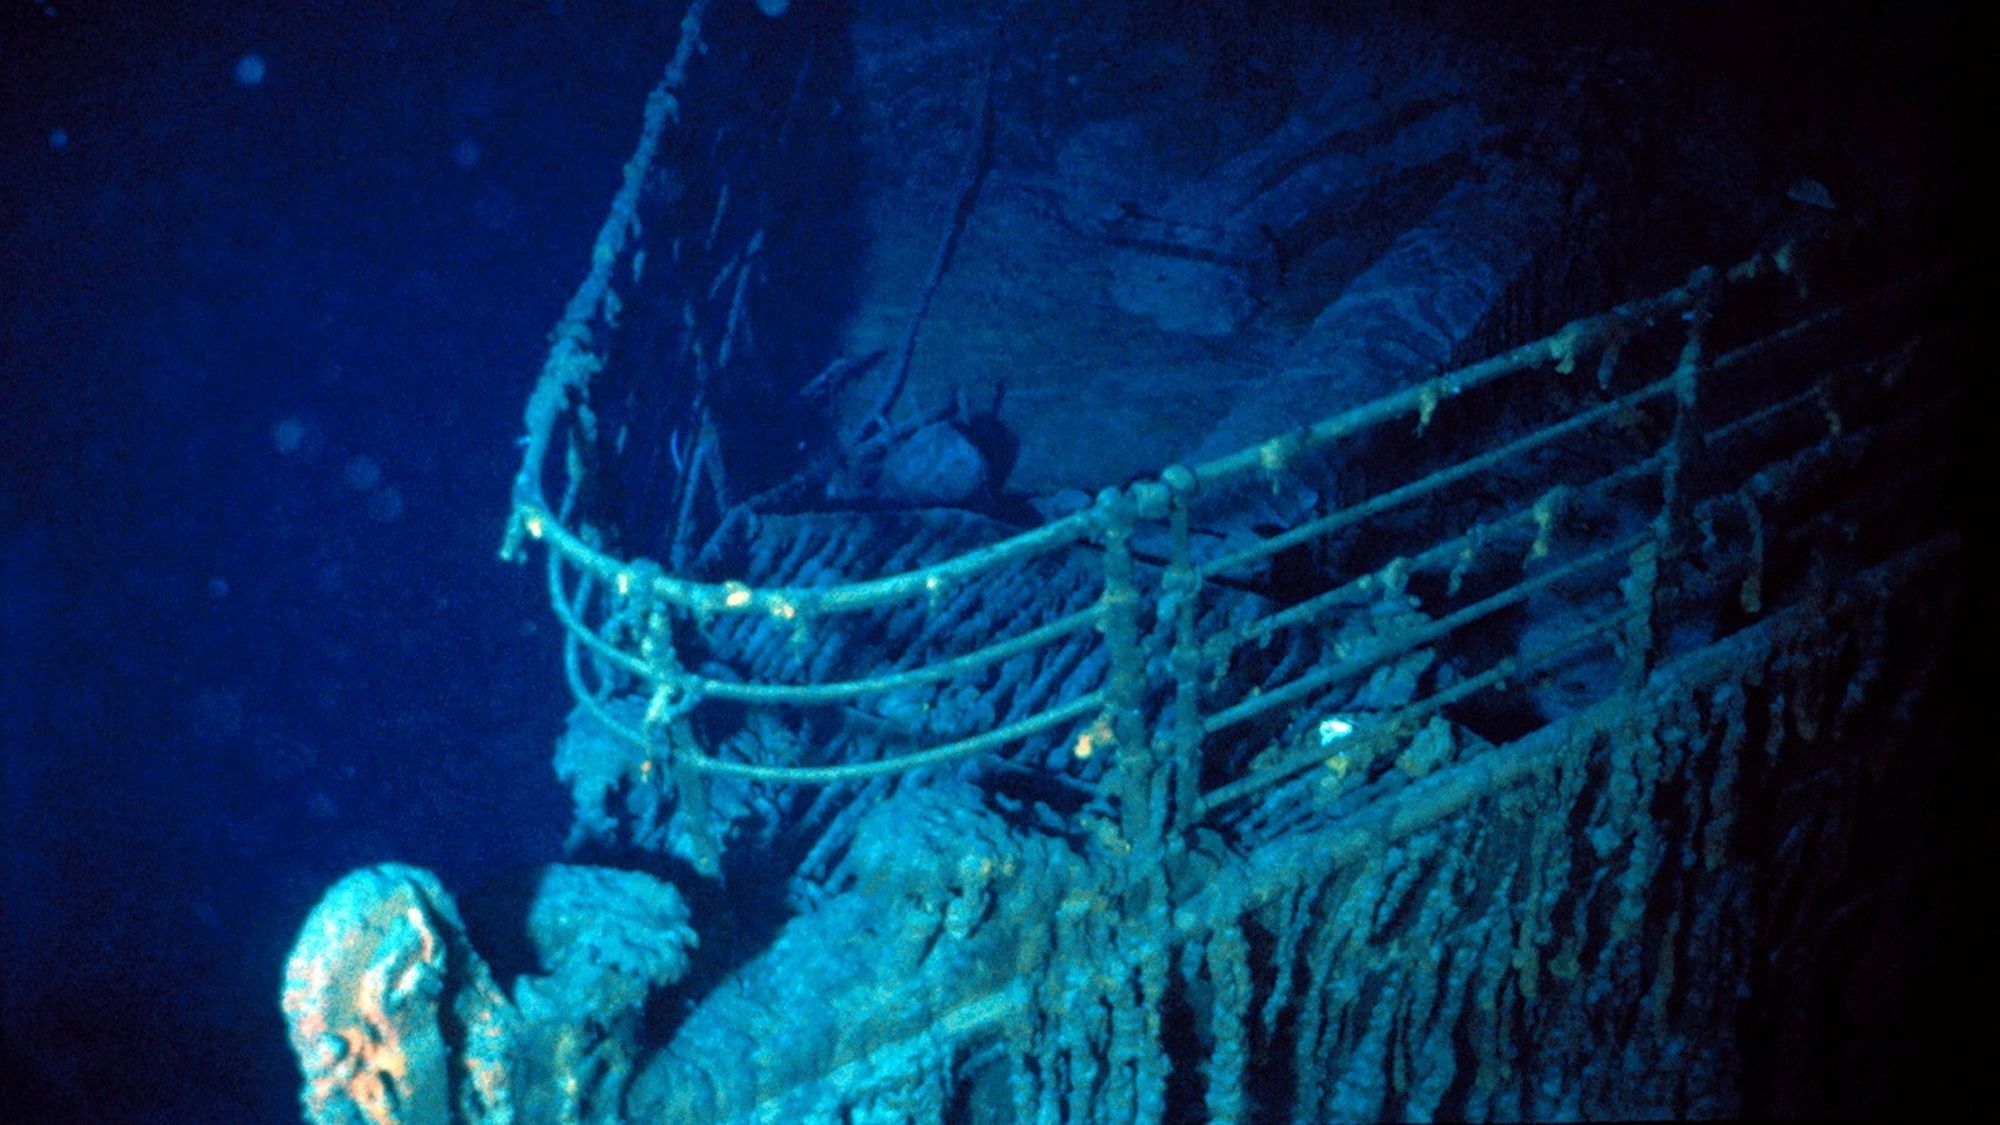 The bow of the Titanic, photographed during an early dive to the vessel in 1986. Photo credit: Wood...